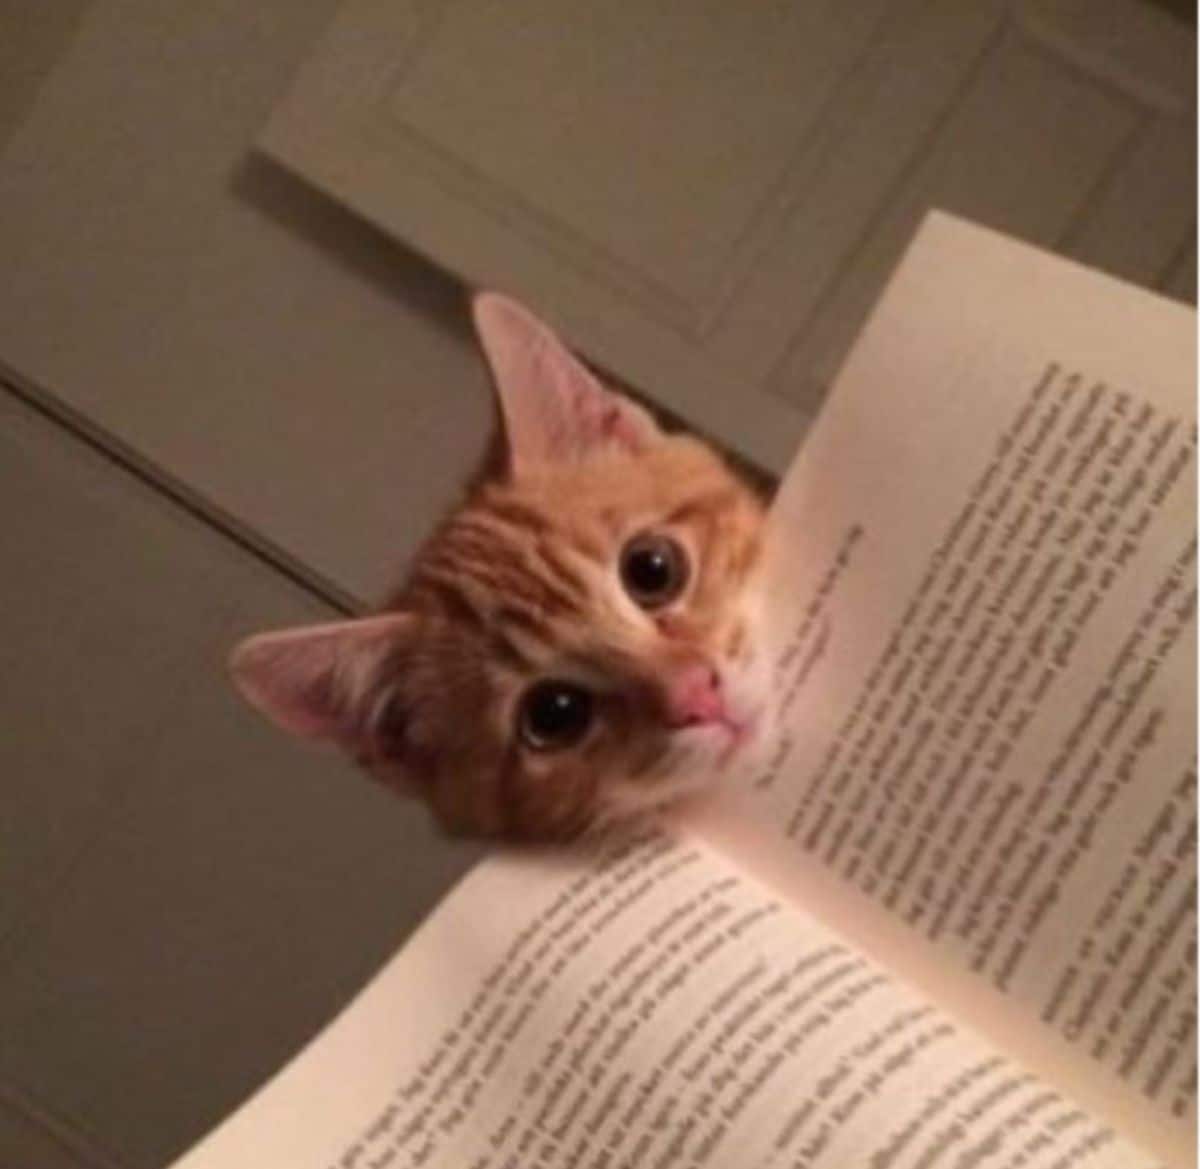 orange and white kitten poking its head above an open book and placing the chin on the top of the book